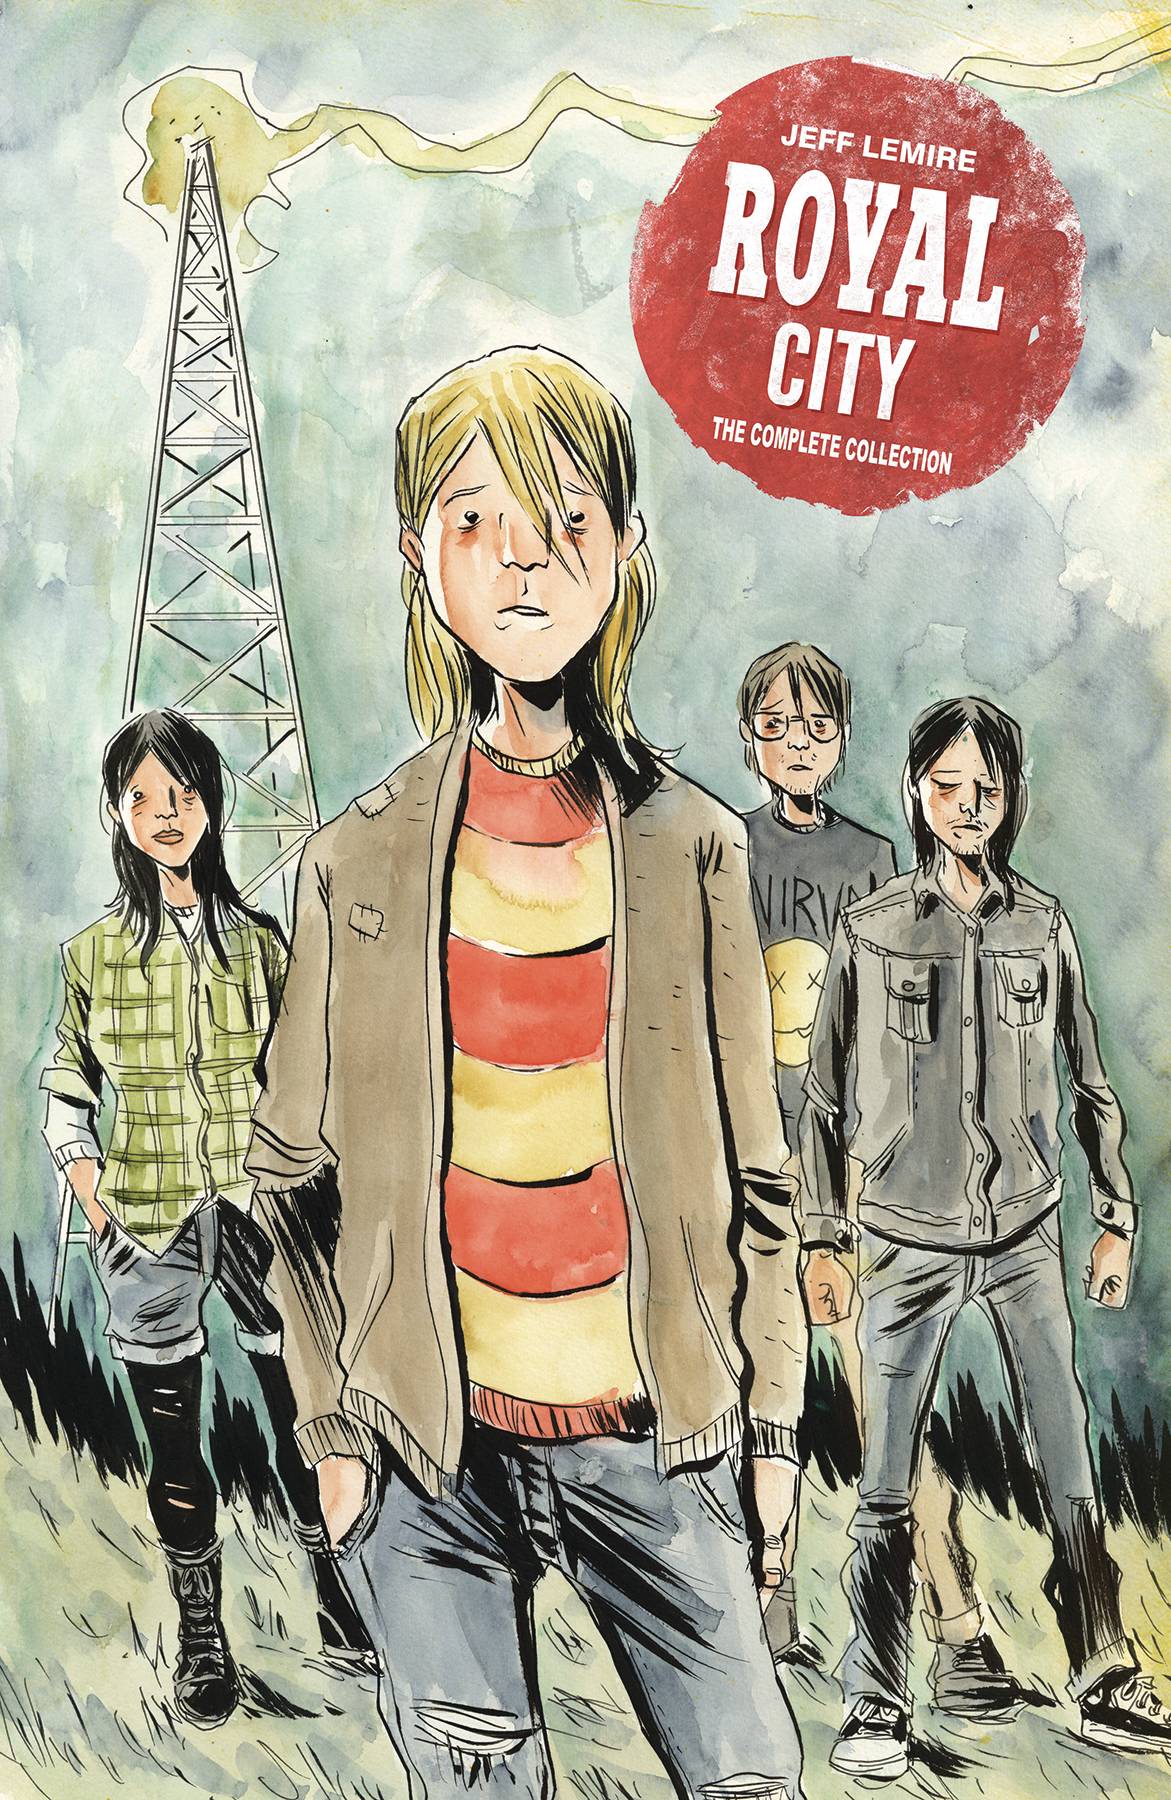 Royal City  Vol 01 Complete Collection